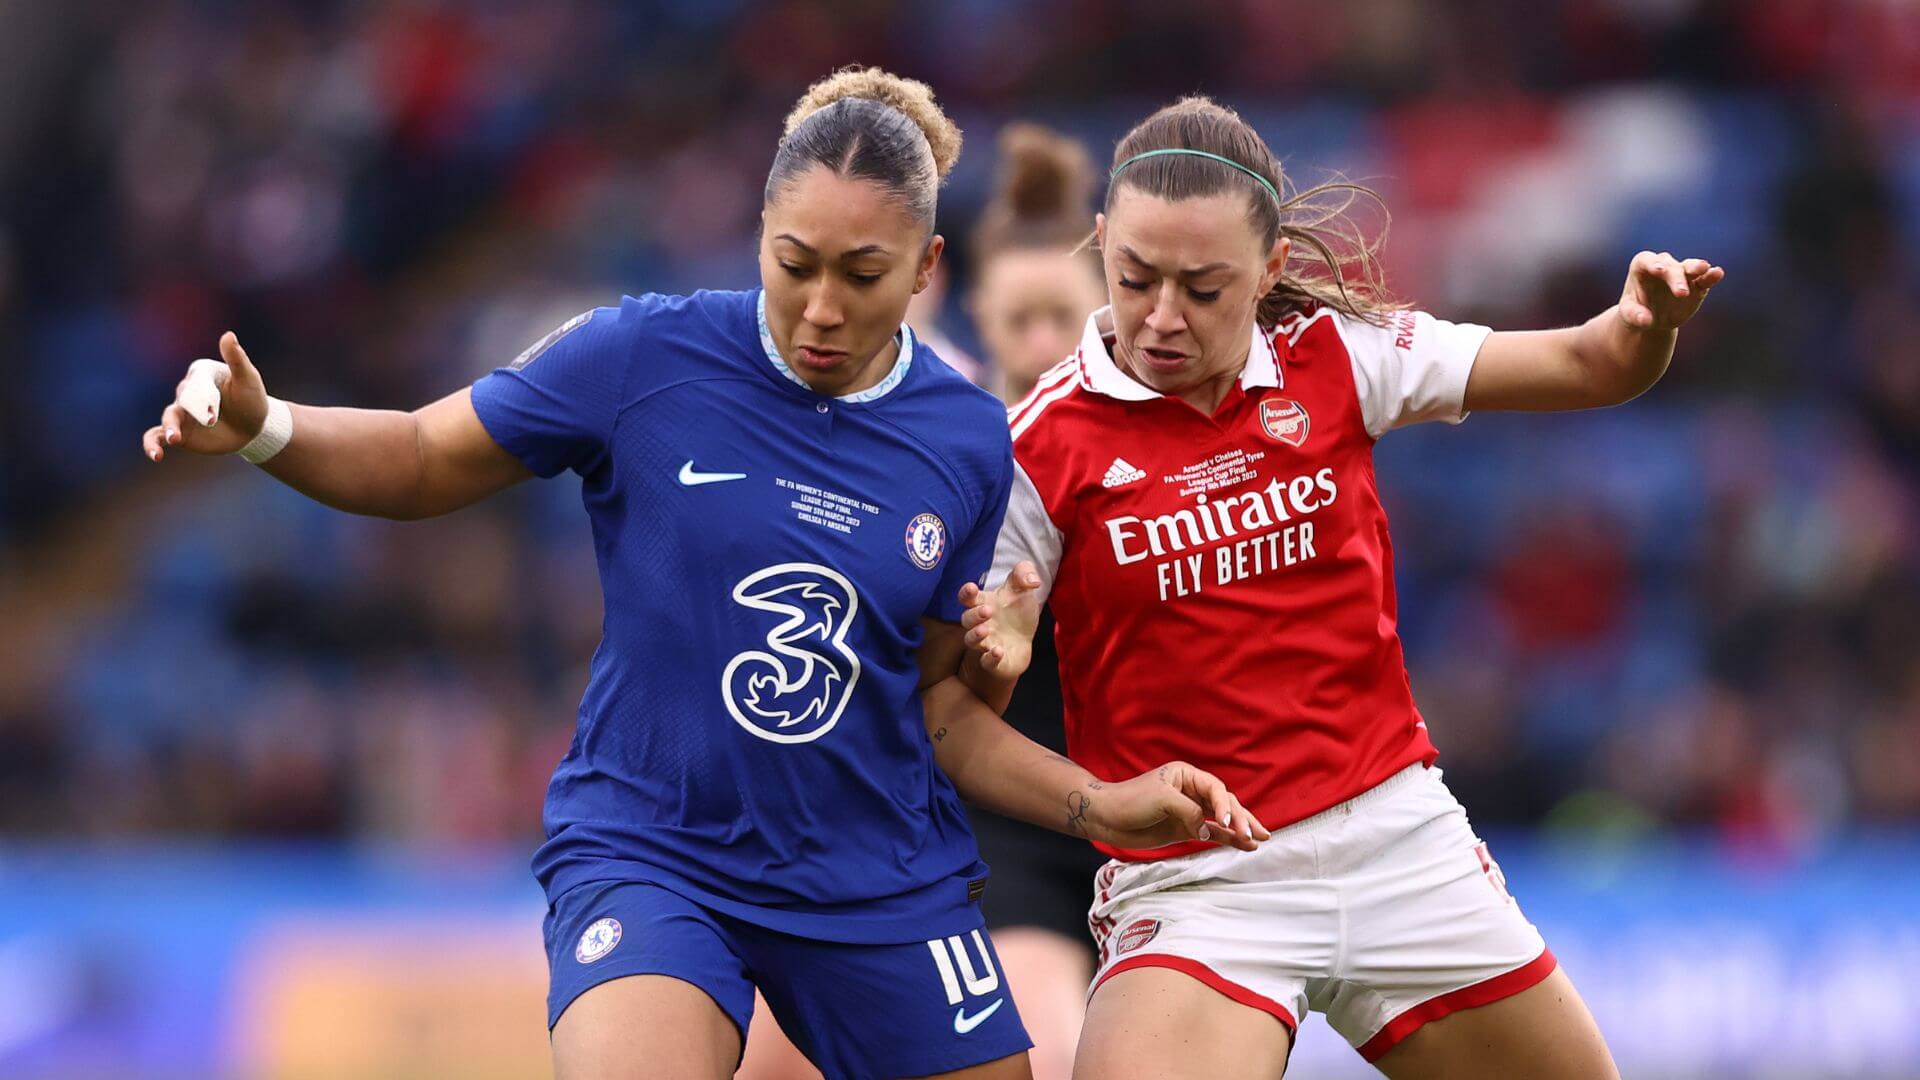 Chelsea and Arsenal have one of the biggest rivalries in women's soccer